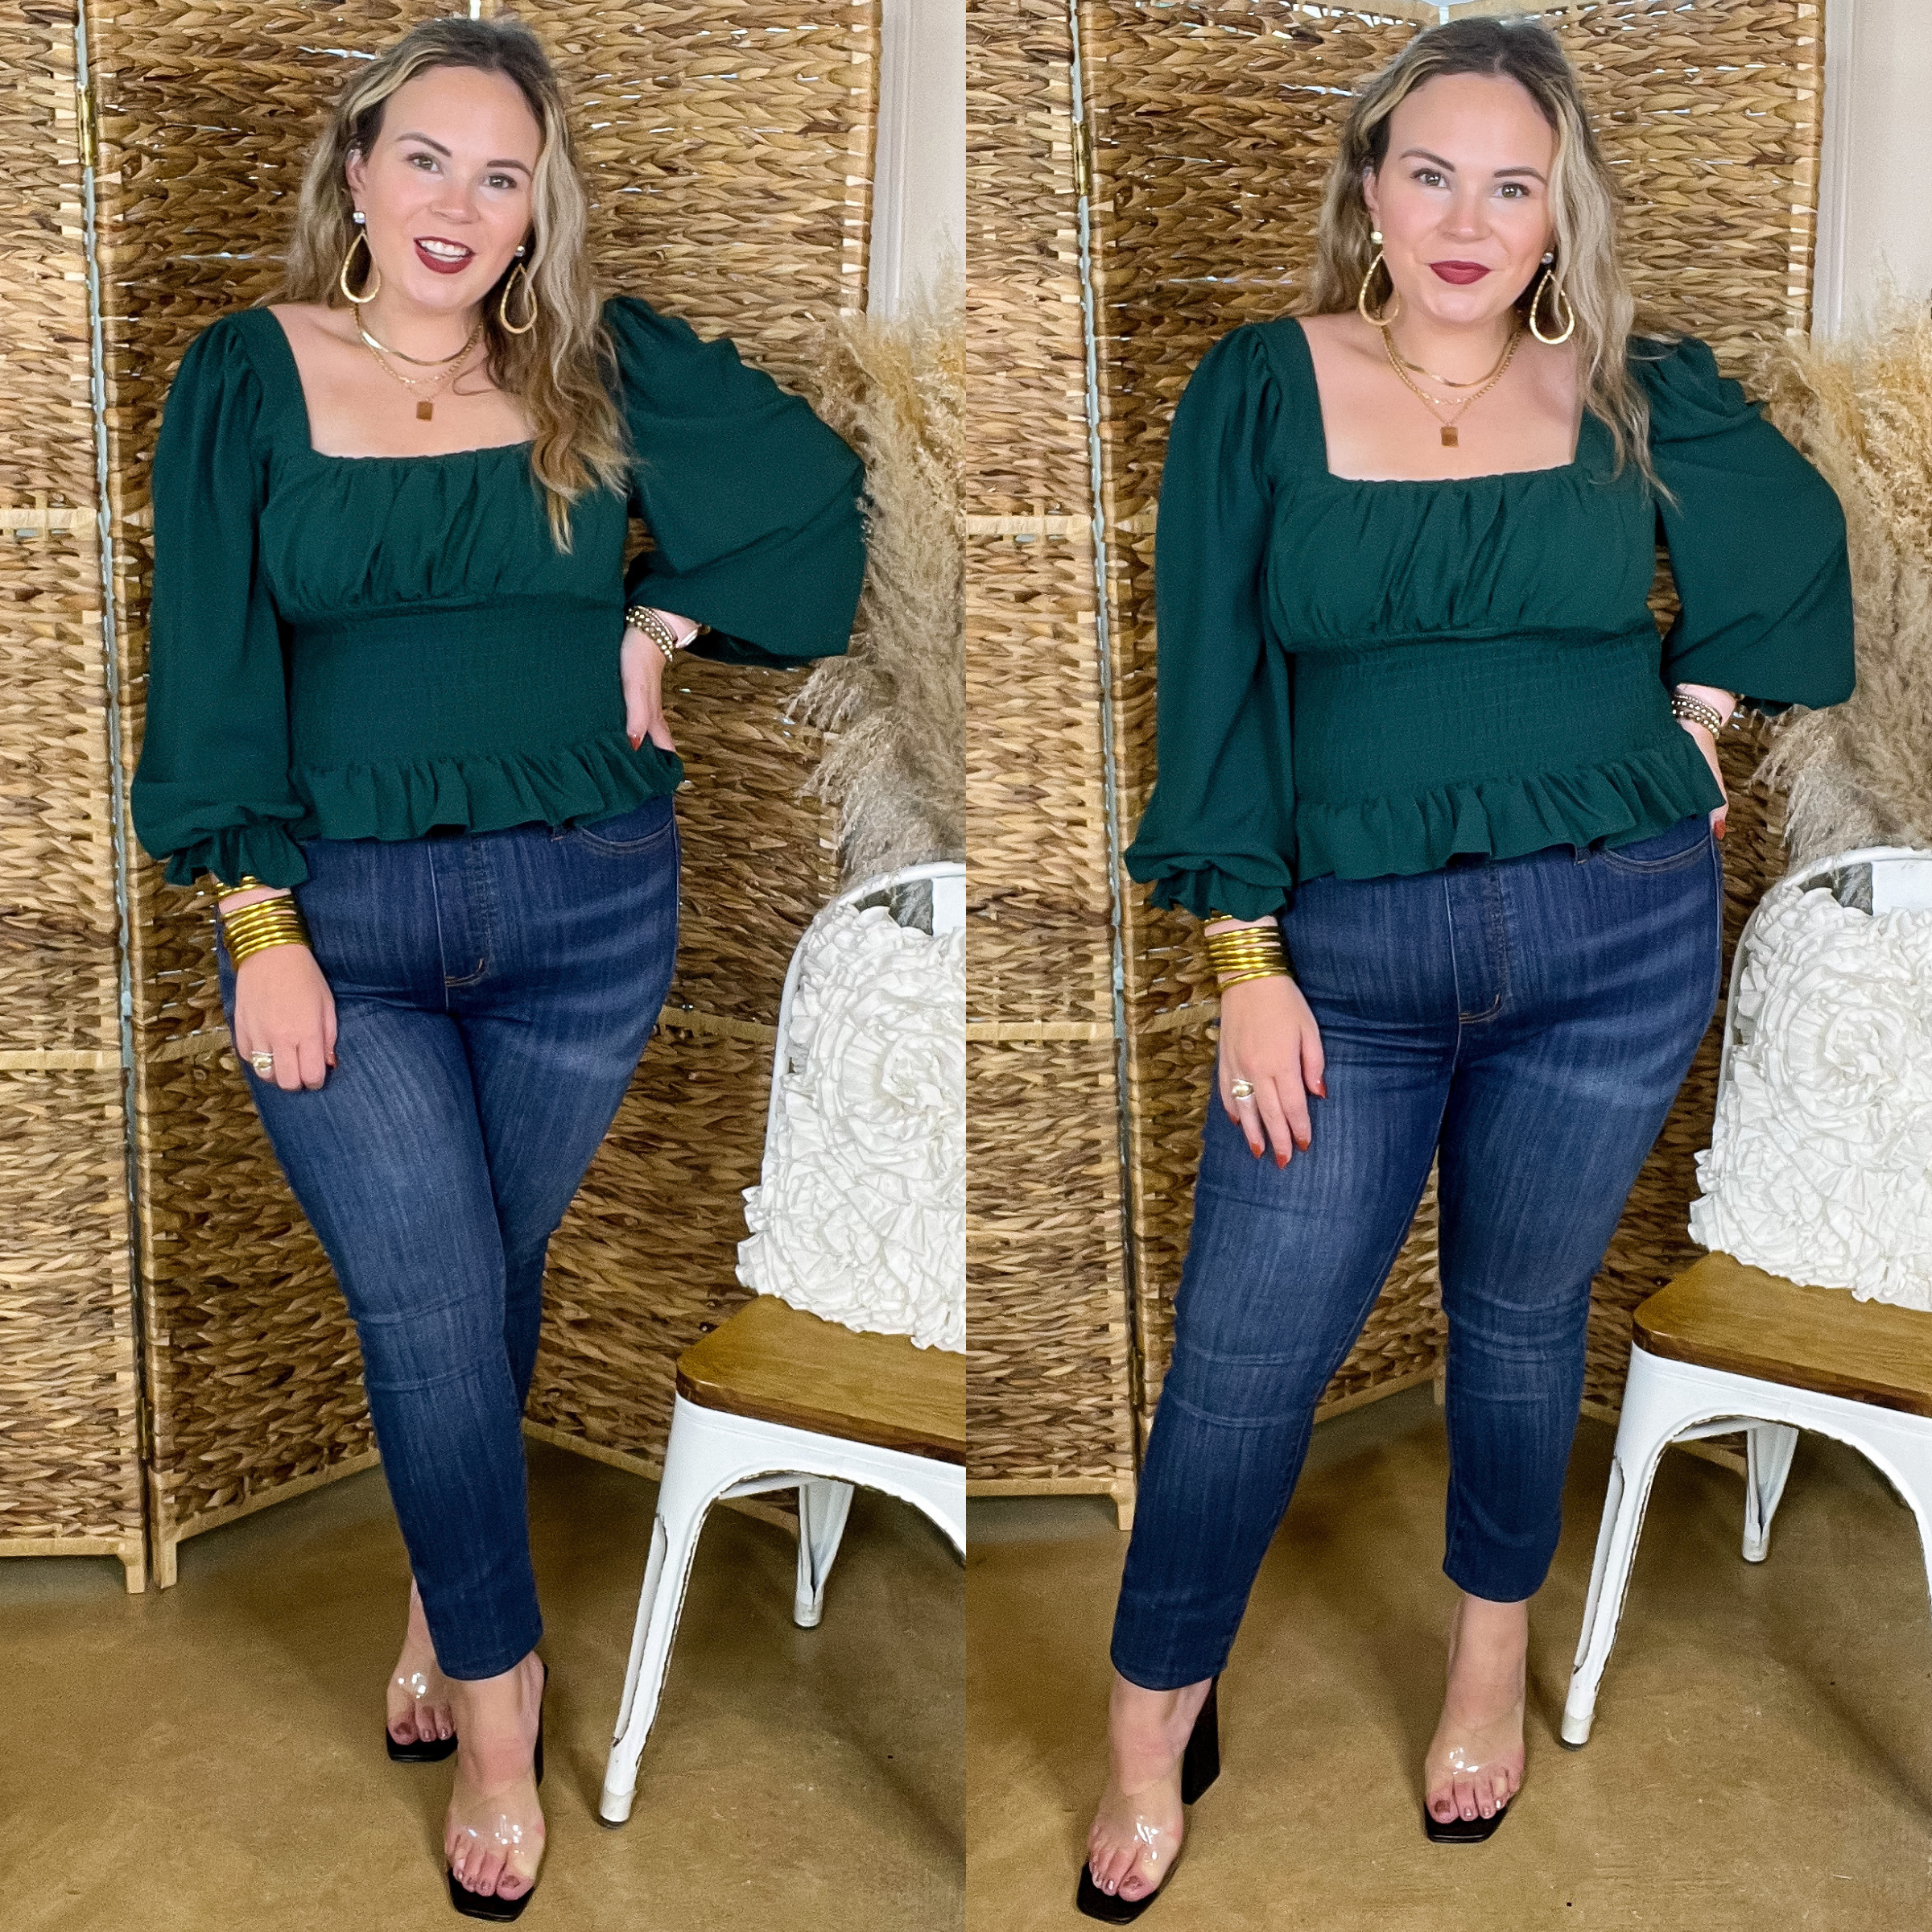 Model is wearing a green top with a smocked bodice, square neck, long sleeves, and a peplum hemline. Model has it paired with skinny jeans, black heels, and gold jewelry.